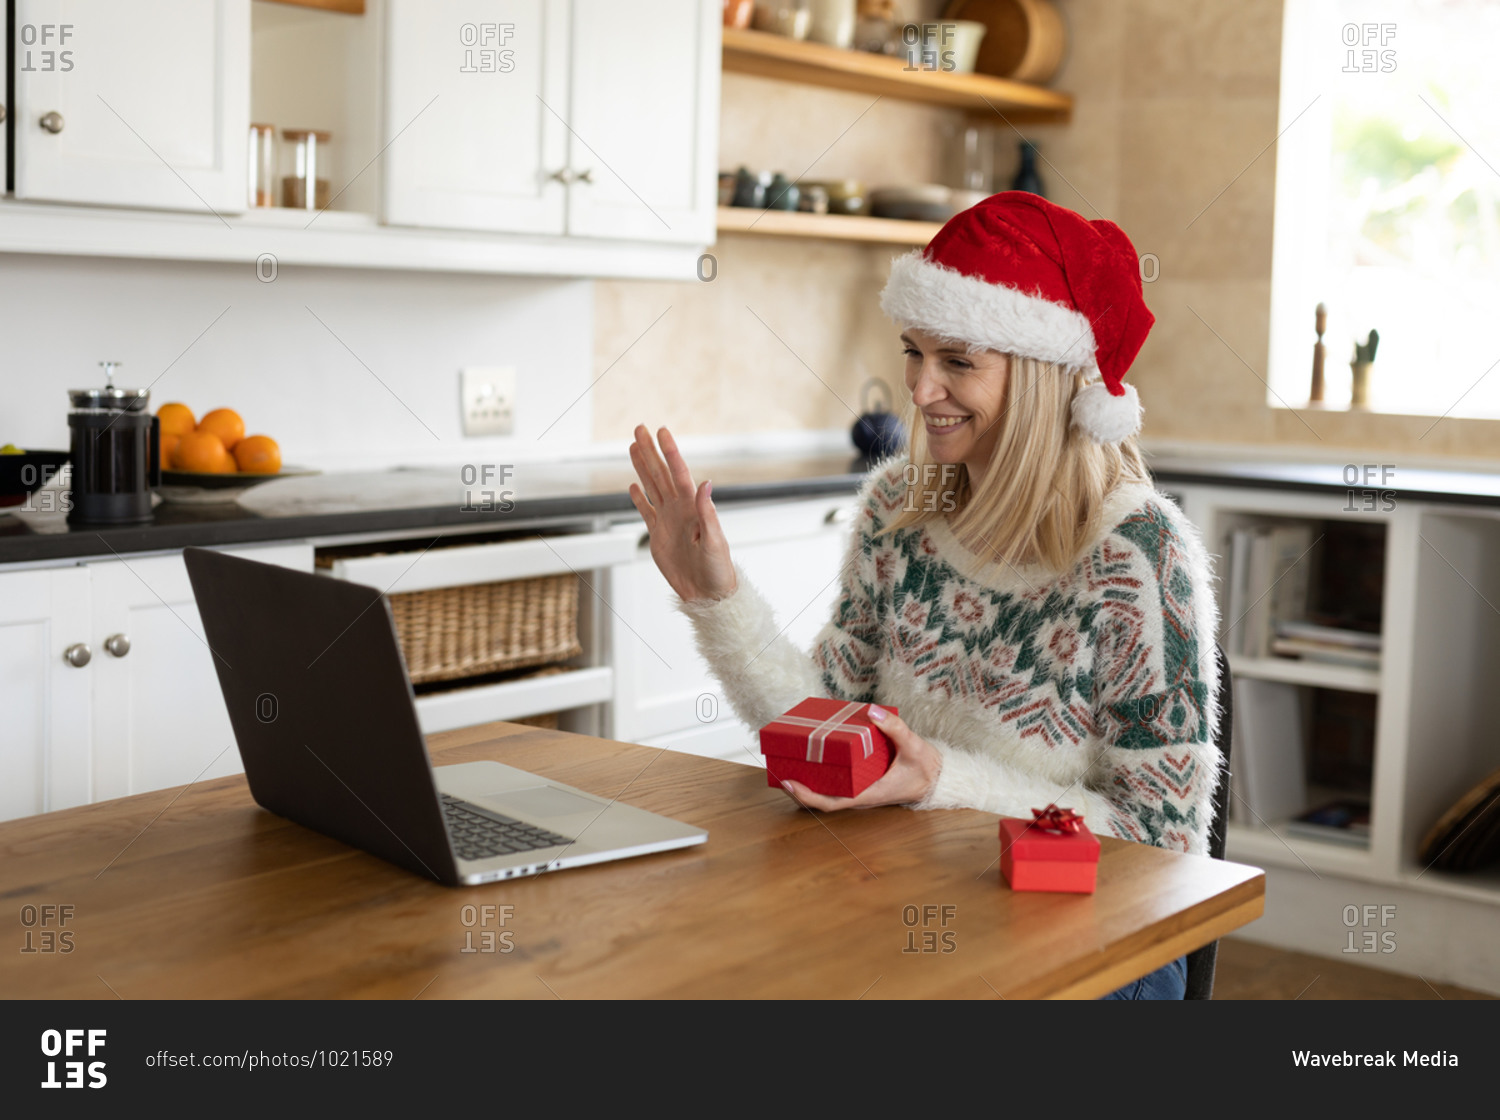 Caucasian woman spending time at home, sitting in kitchen at Christmas wearing Santa hat, using laptop with presents on table. Social distancing during Covid 19 Coronavirus quarantine.